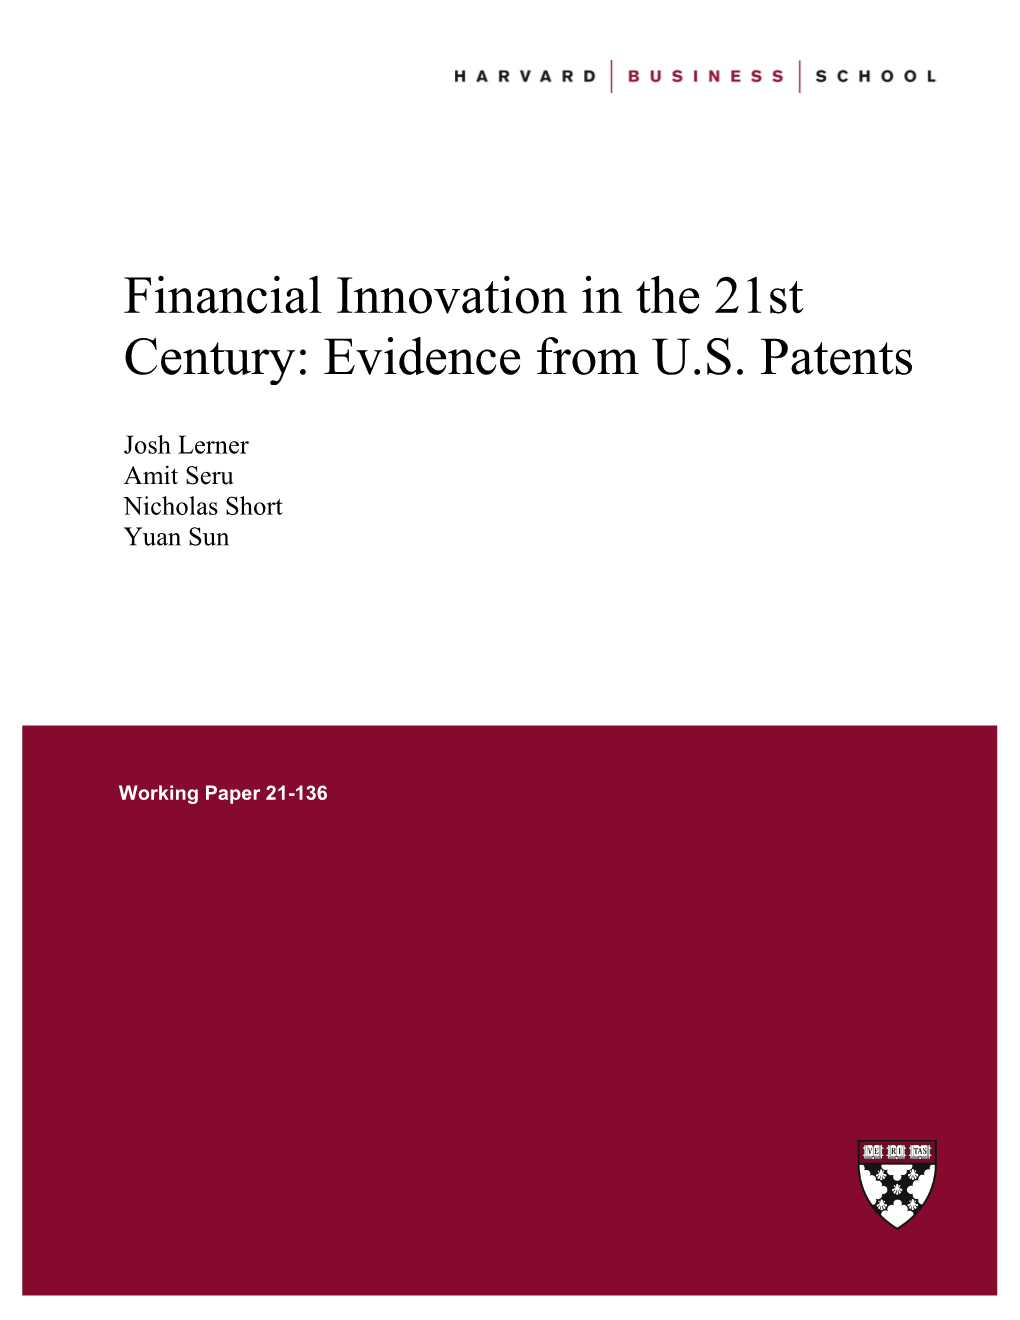 Financial Innovation in the 21St Century: Evidence from U.S. Patents